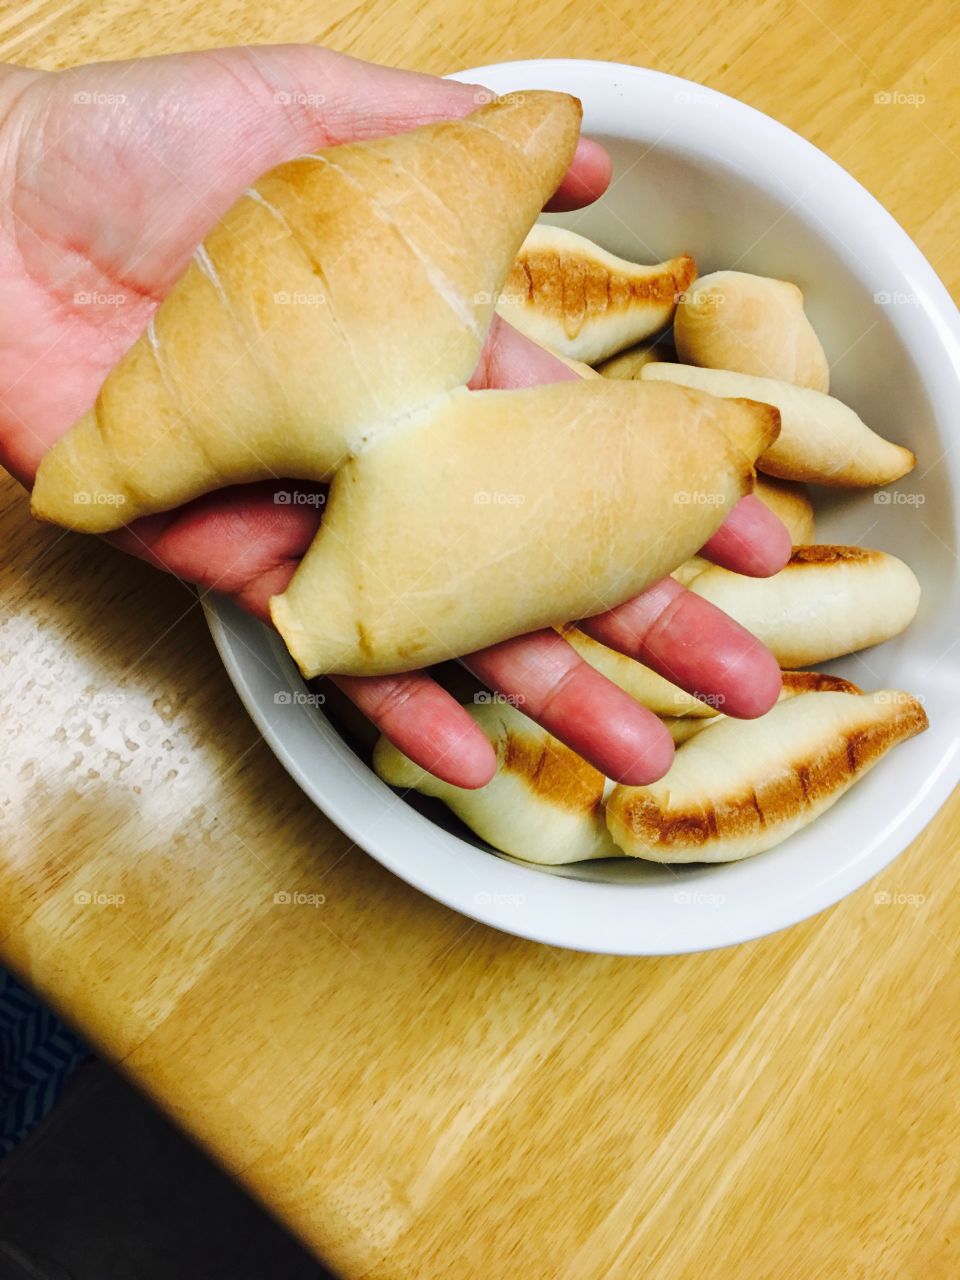 Holding home made bread